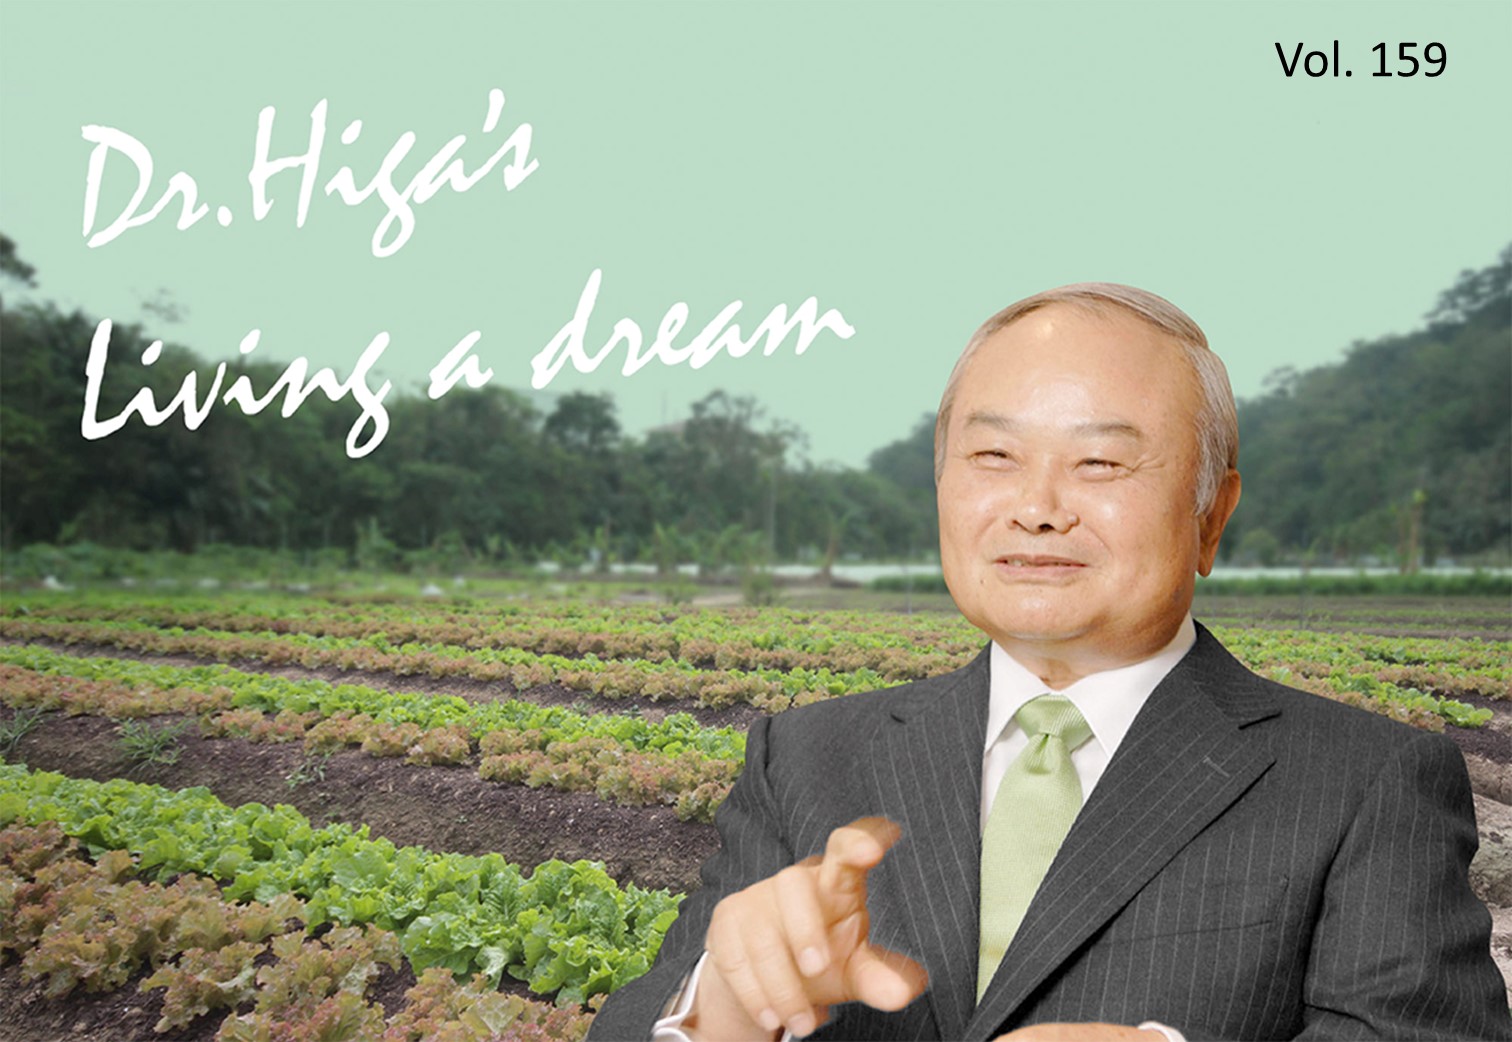 Dr. Higa's "Living a Dream": The latest article #159 is up!